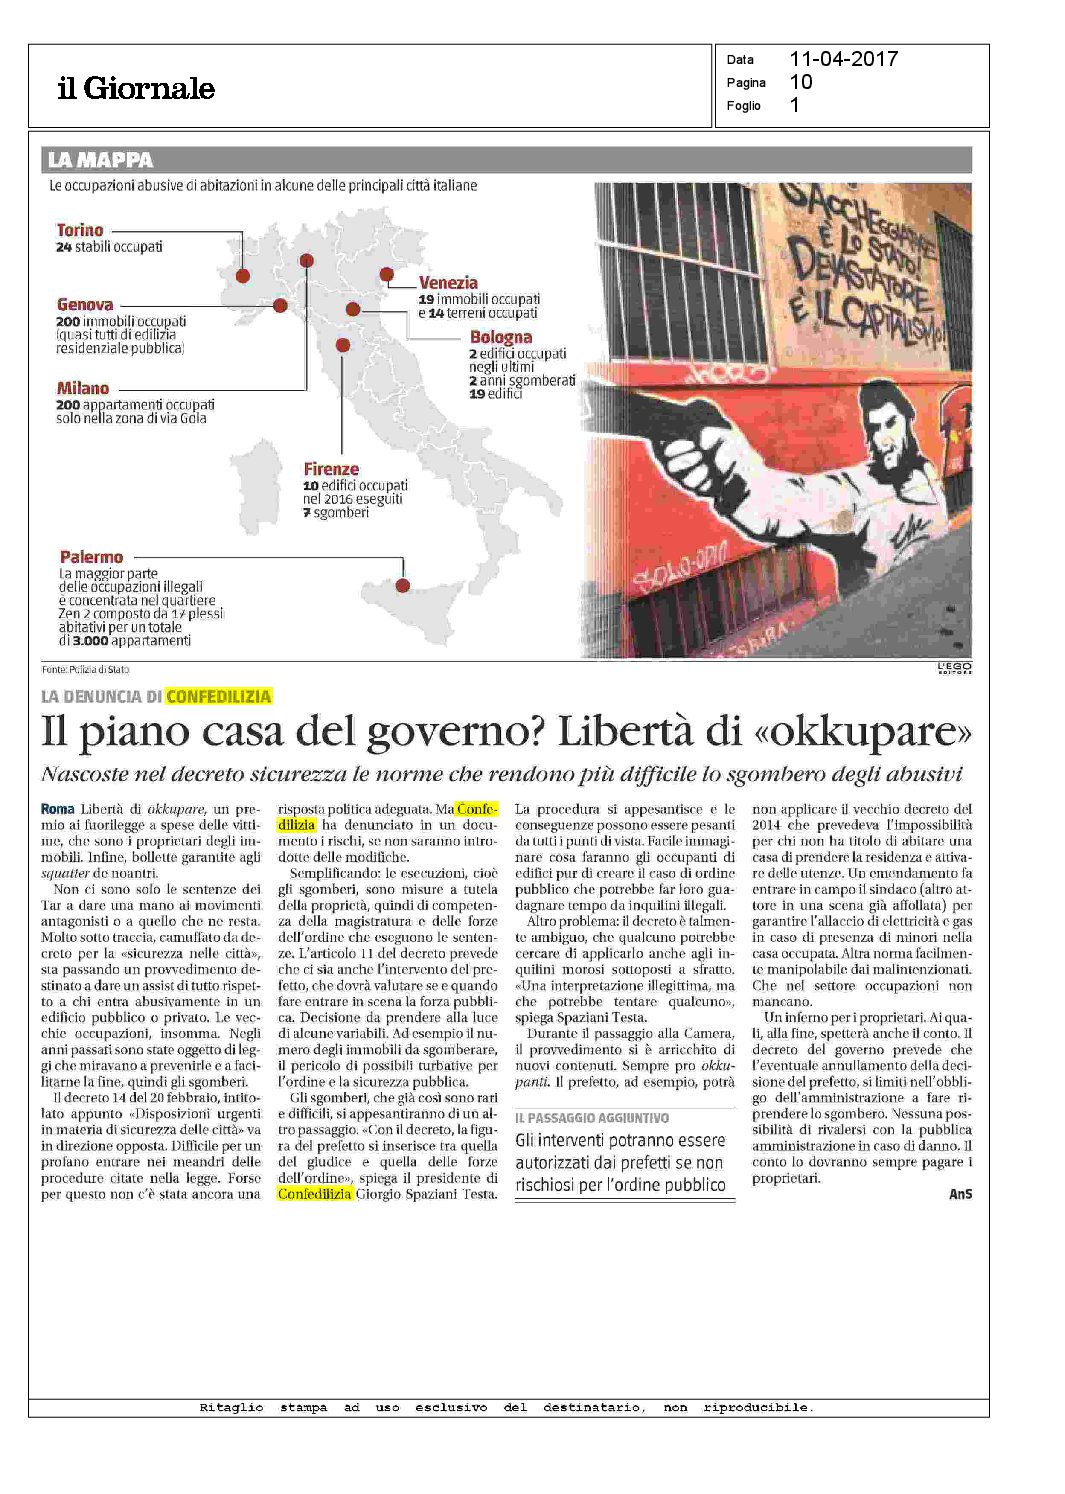 Giornale_11.4.17